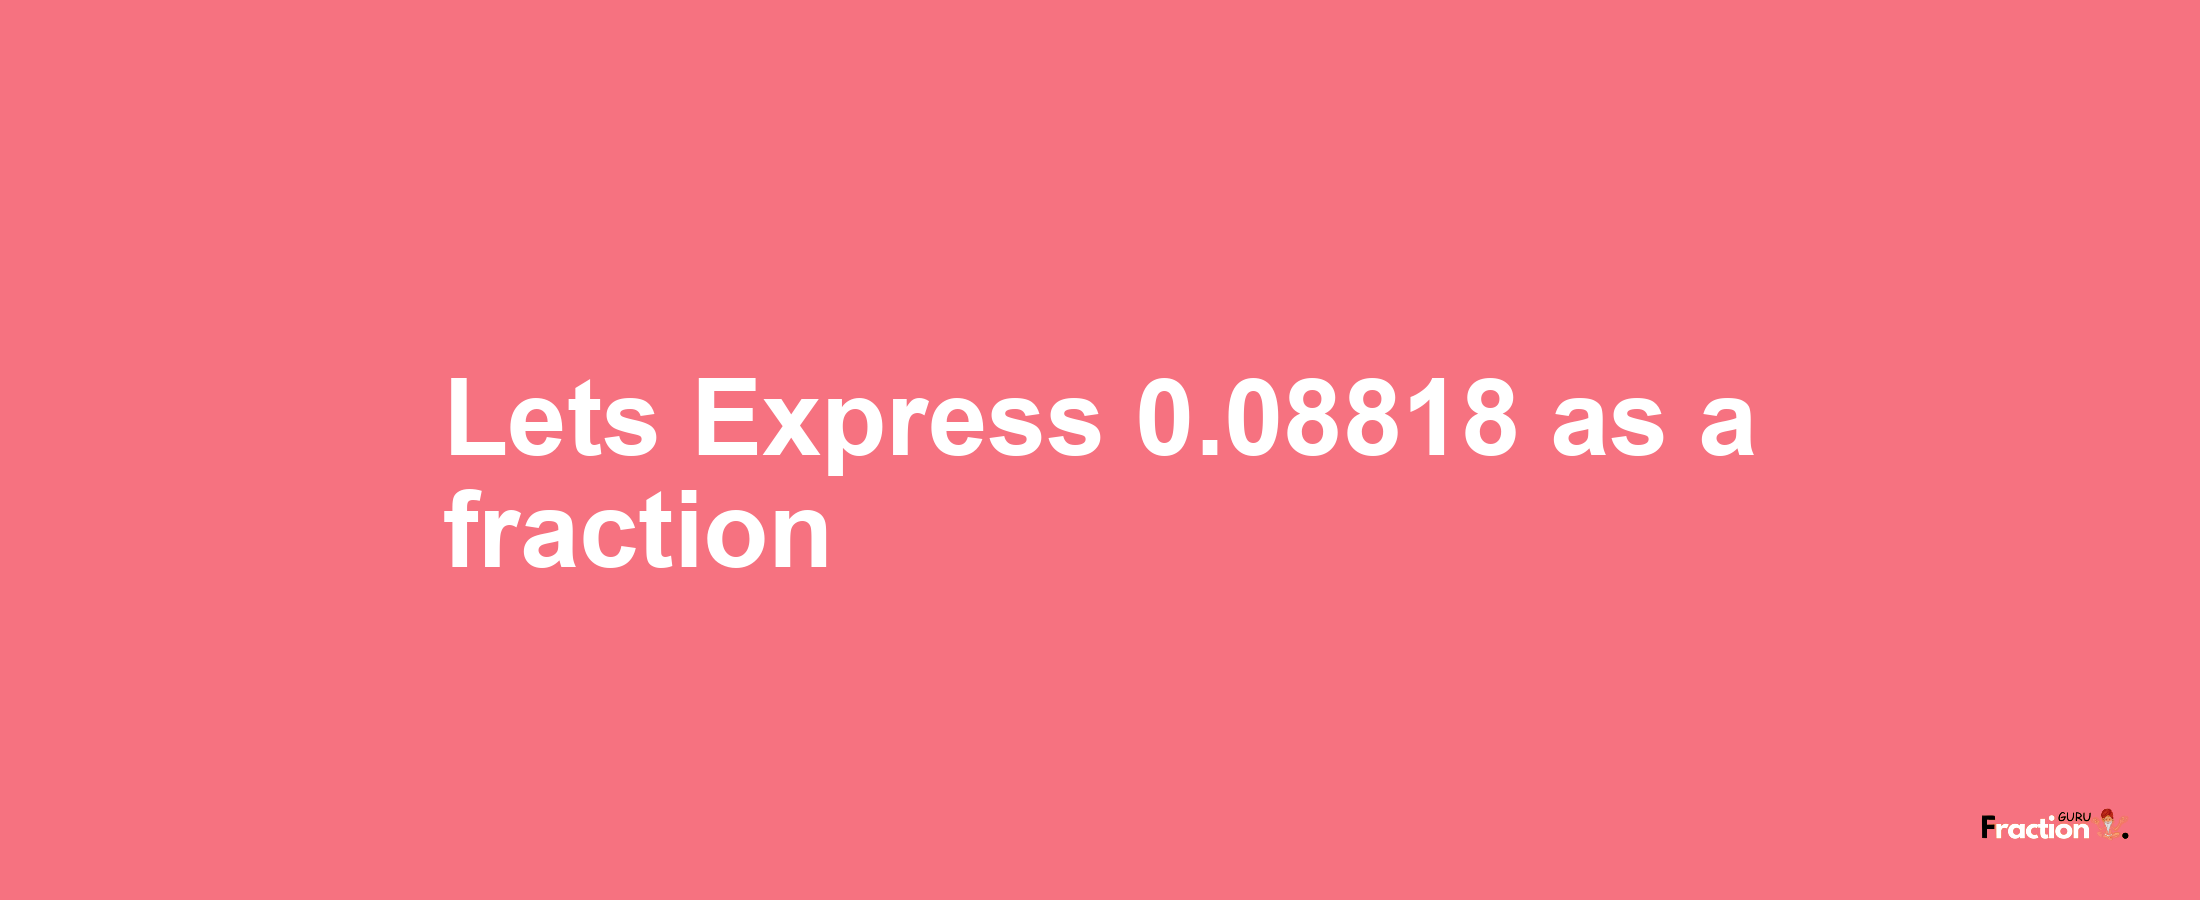 Lets Express 0.08818 as afraction